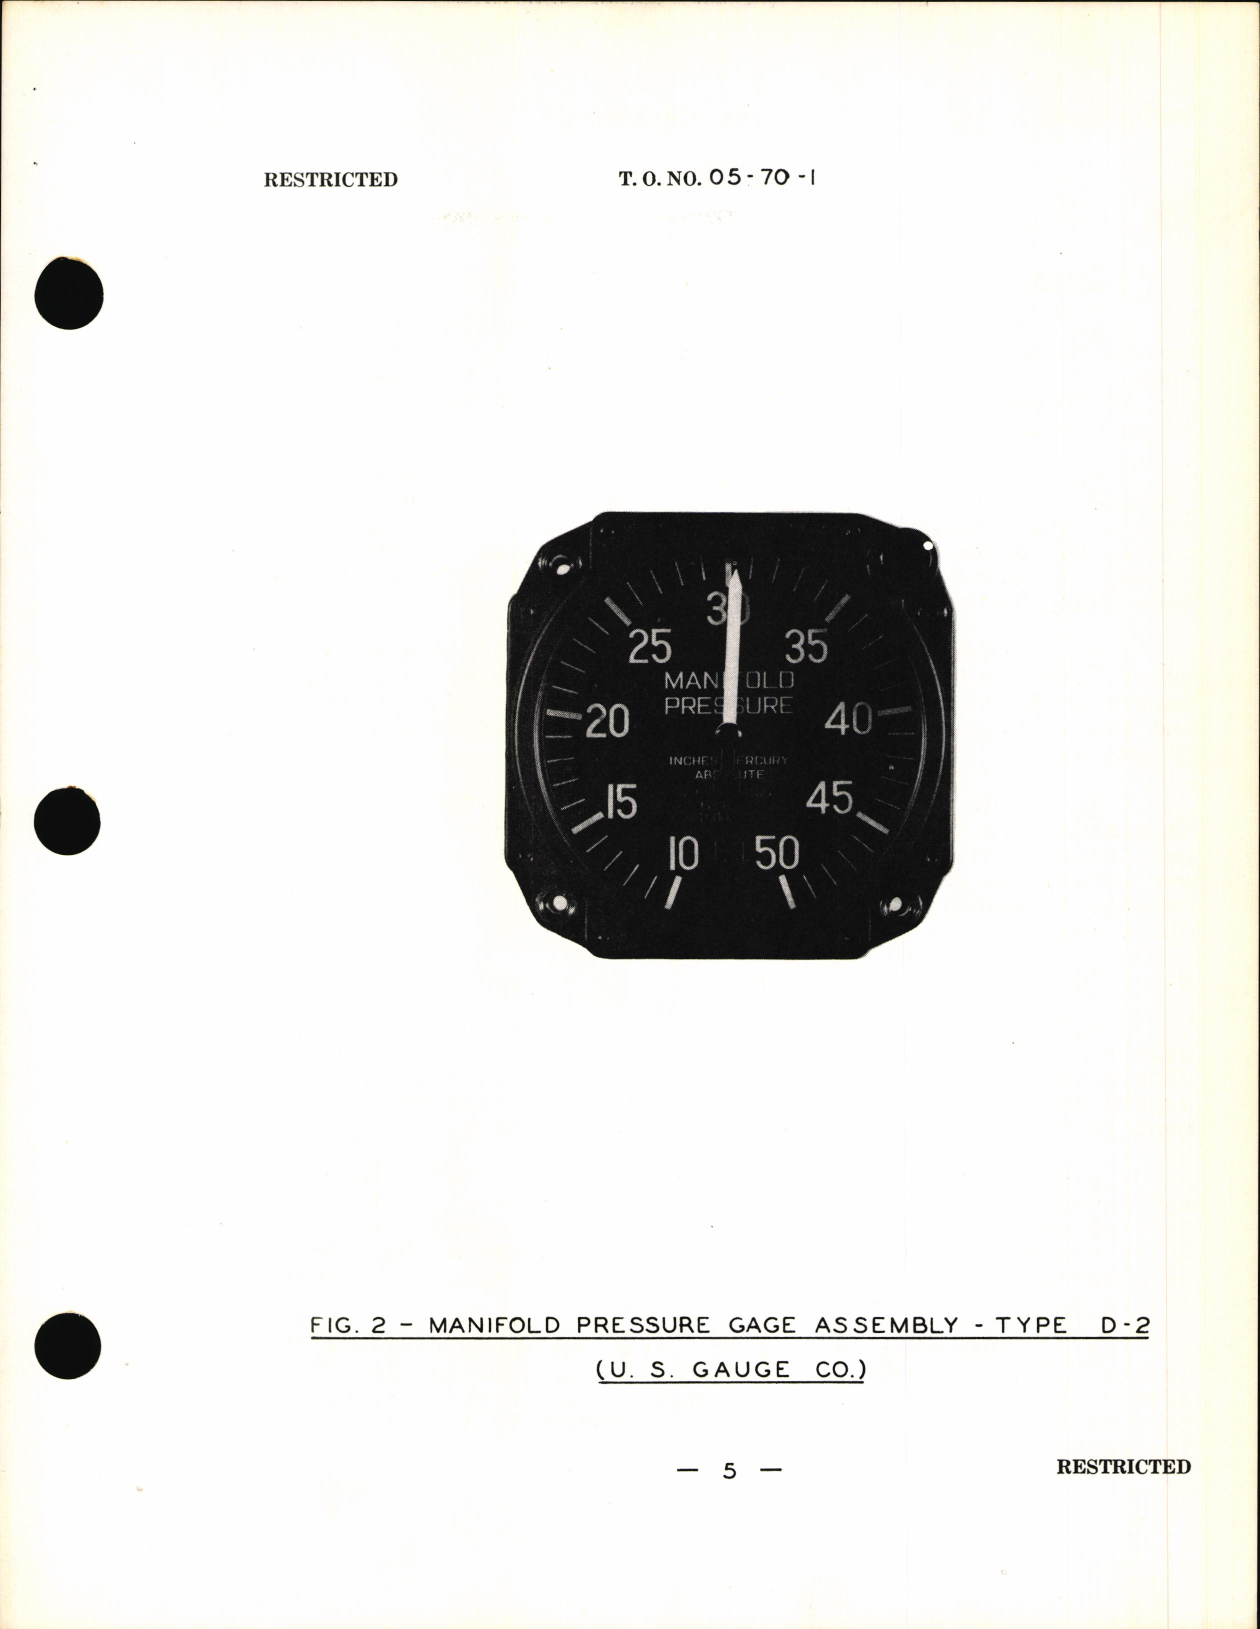 Sample page 7 from AirCorps Library document: Handbook of Instructions with Parts Catalog For Manifold Pressure Gage Types D-1 and D-2